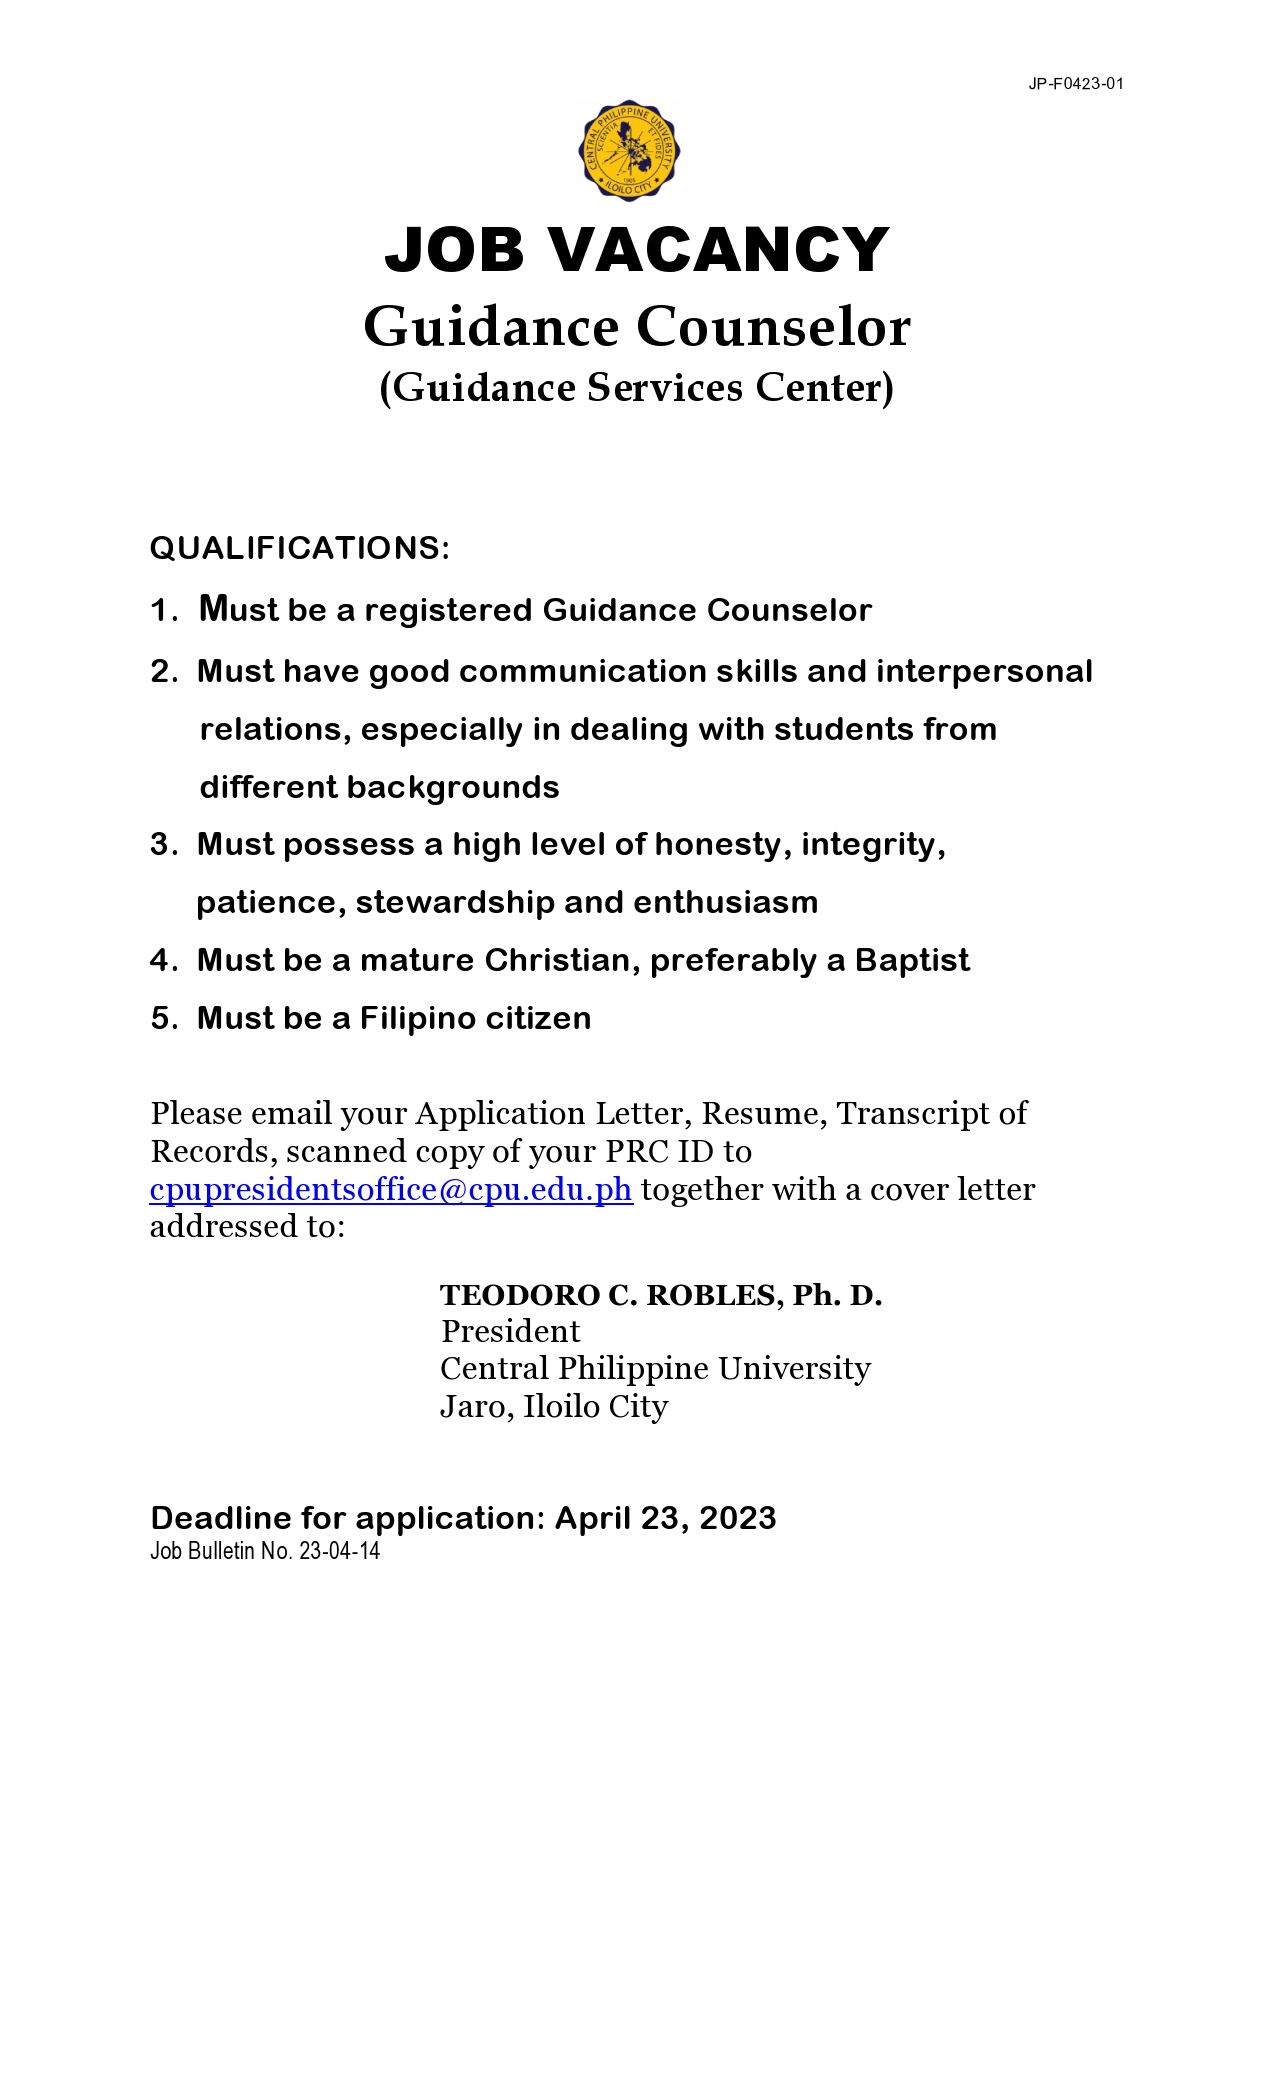 Job Vacancy Guidance Counselor Guidance Services Center Central Philippine University